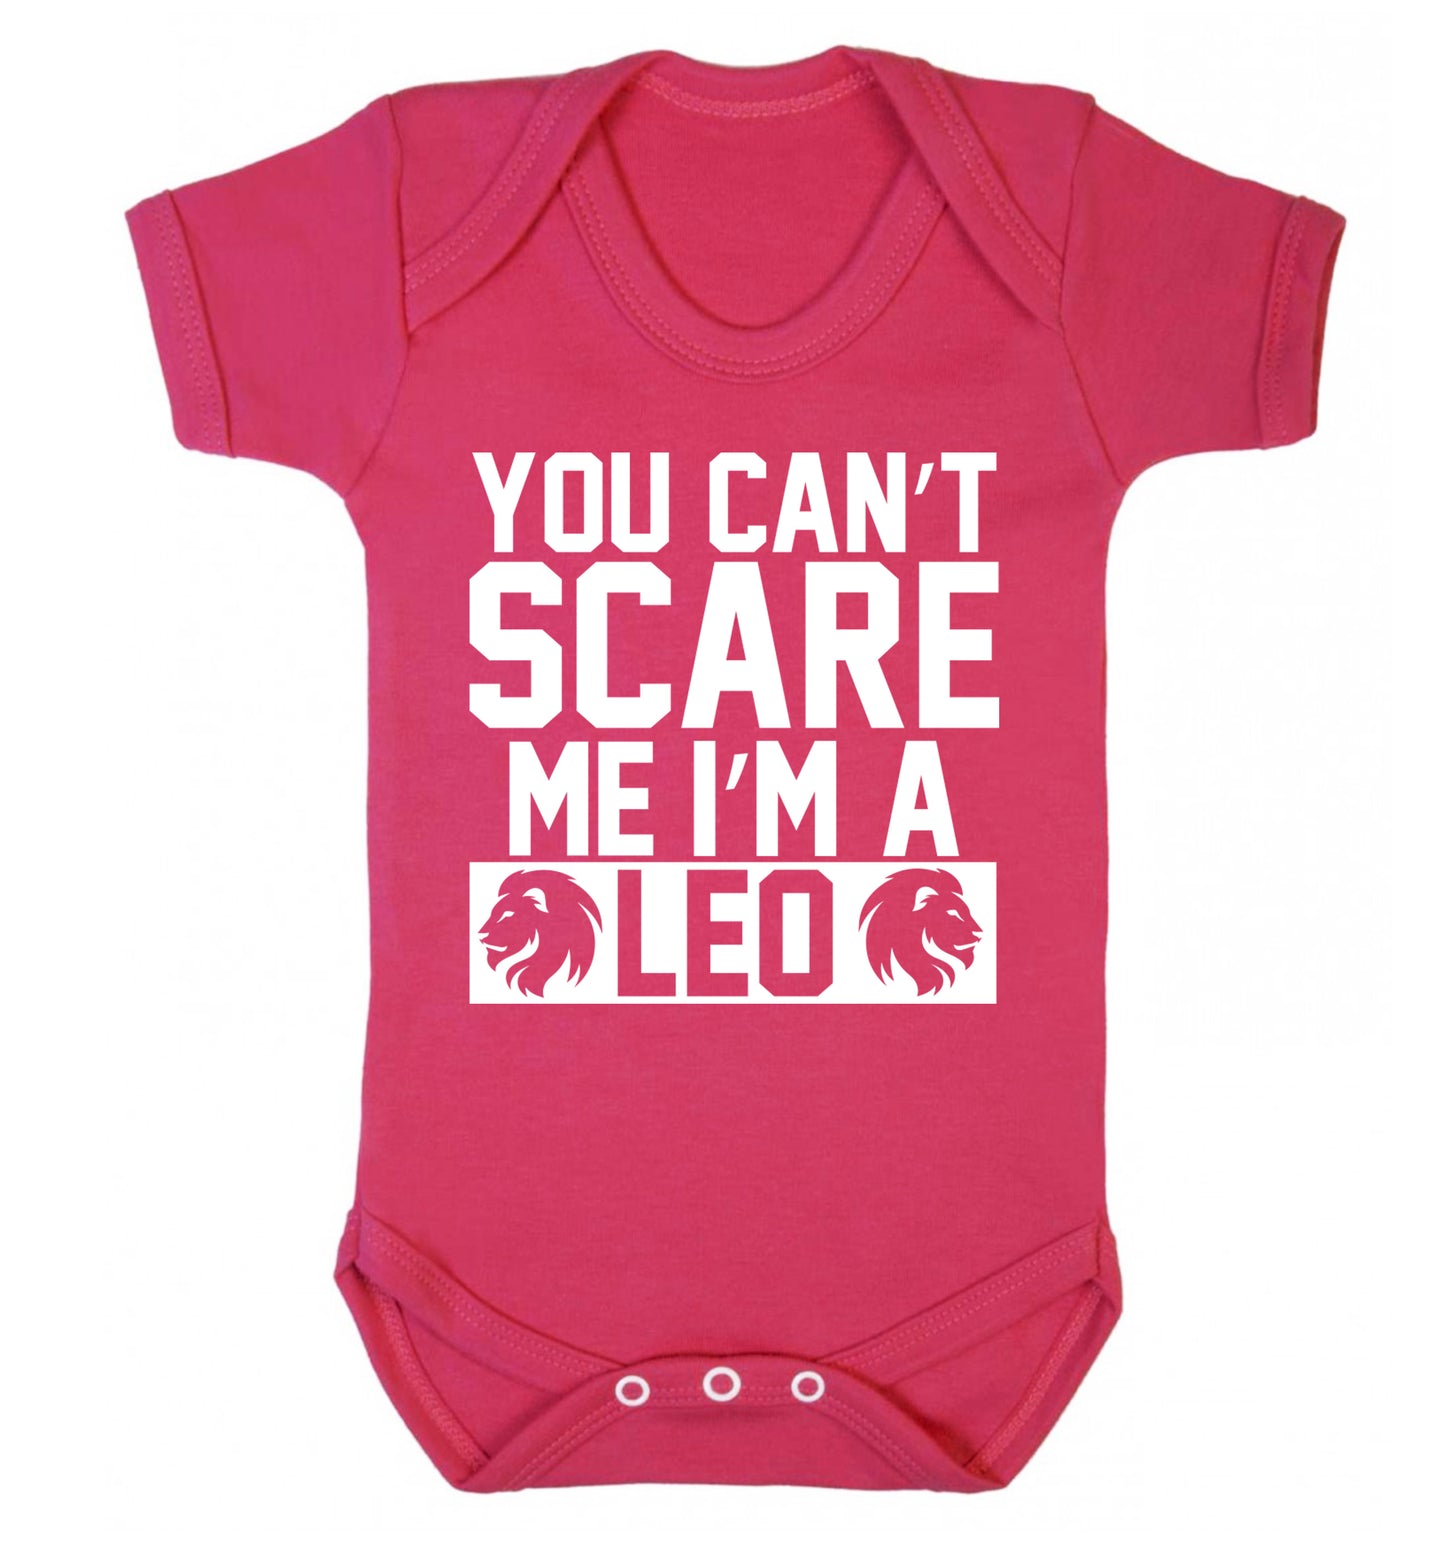 You can't scare me I'm a leo Baby Vest dark pink 18-24 months